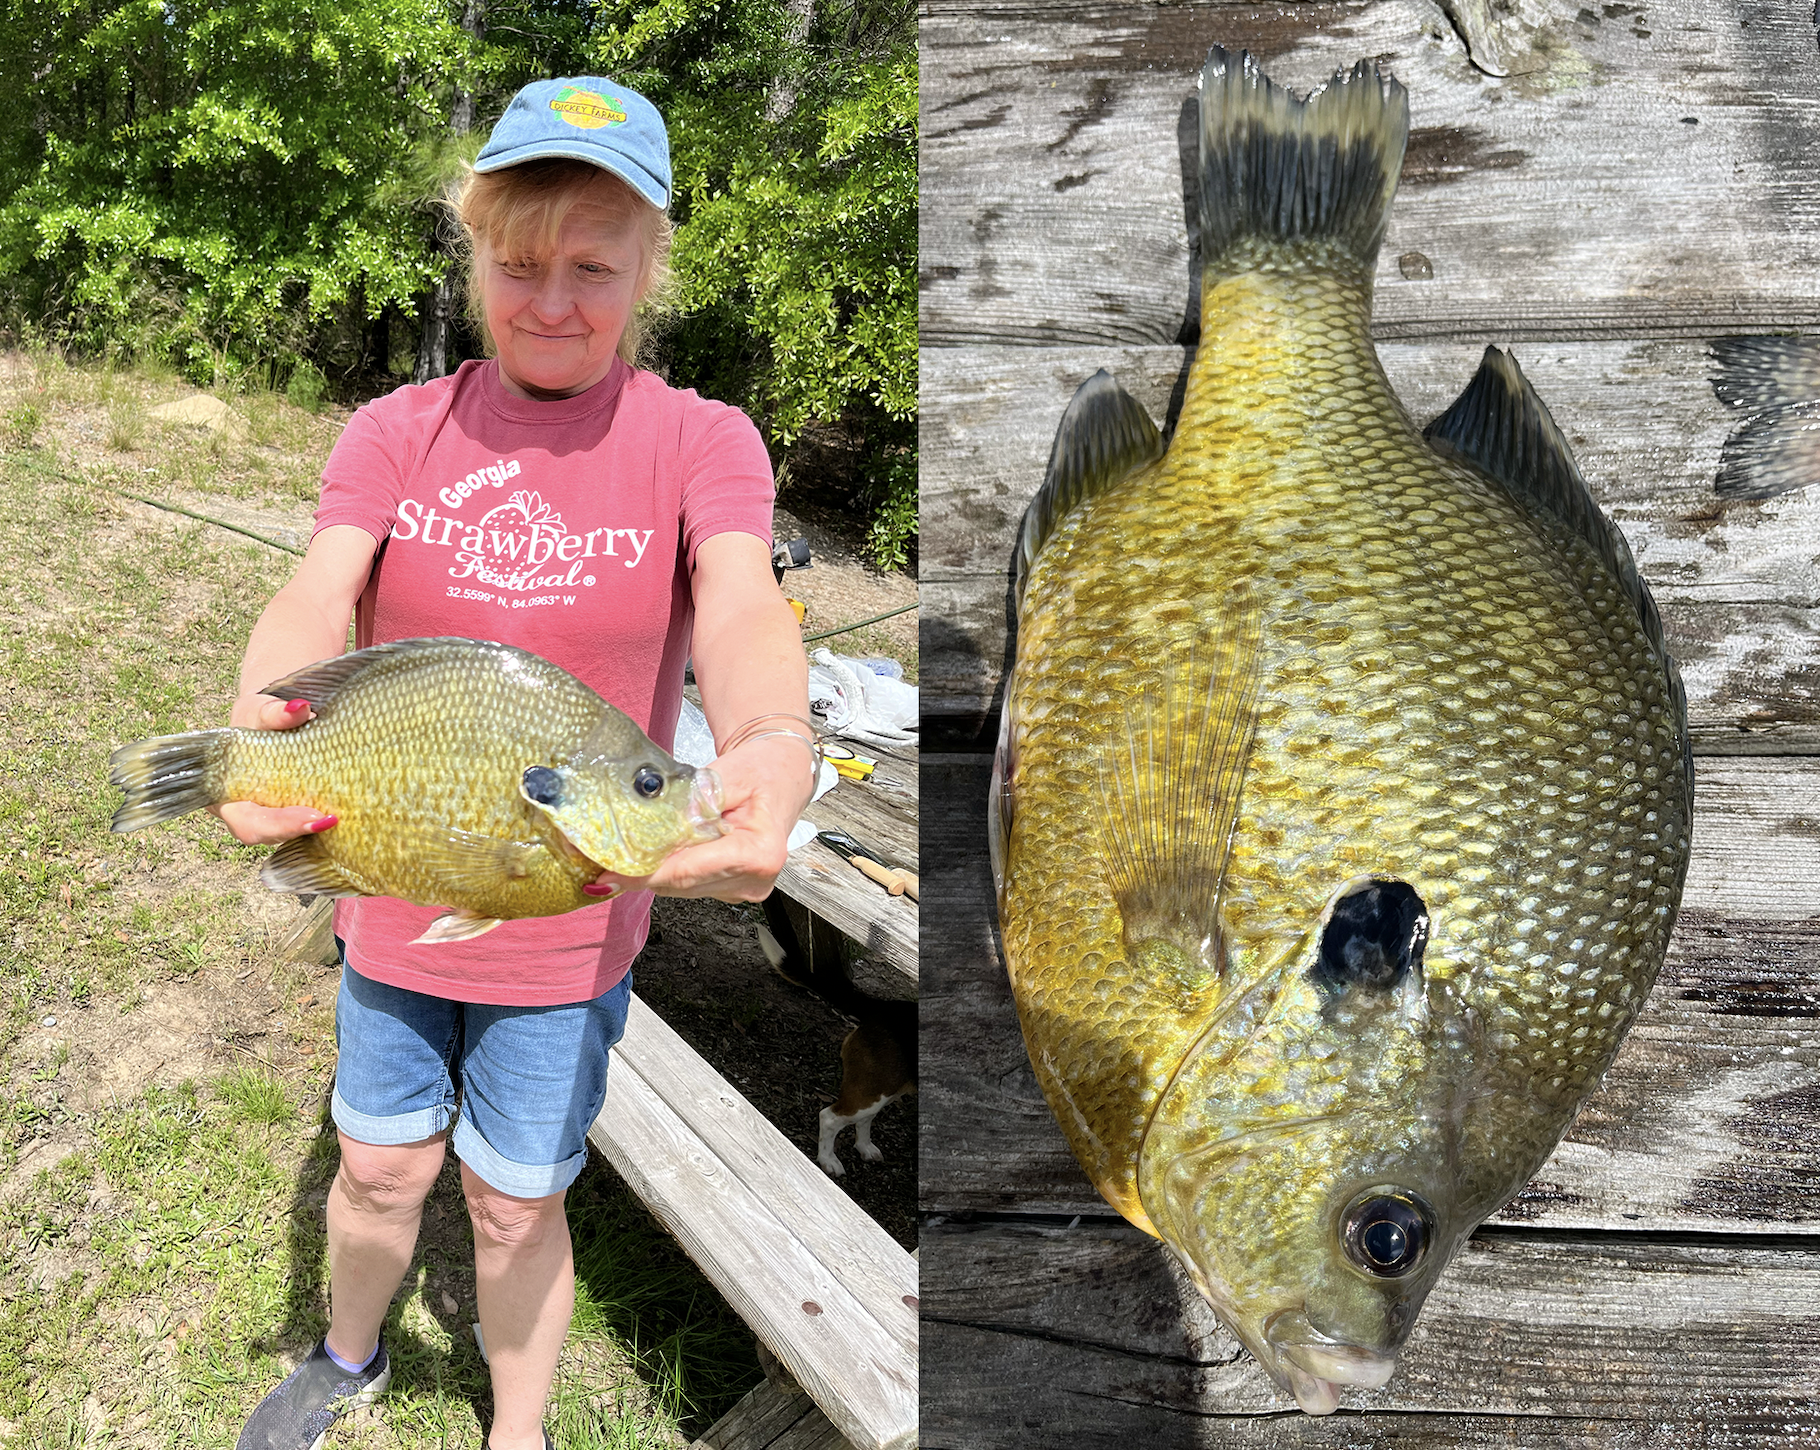 Van Dette with record redear sunfish from Lake Blackshear